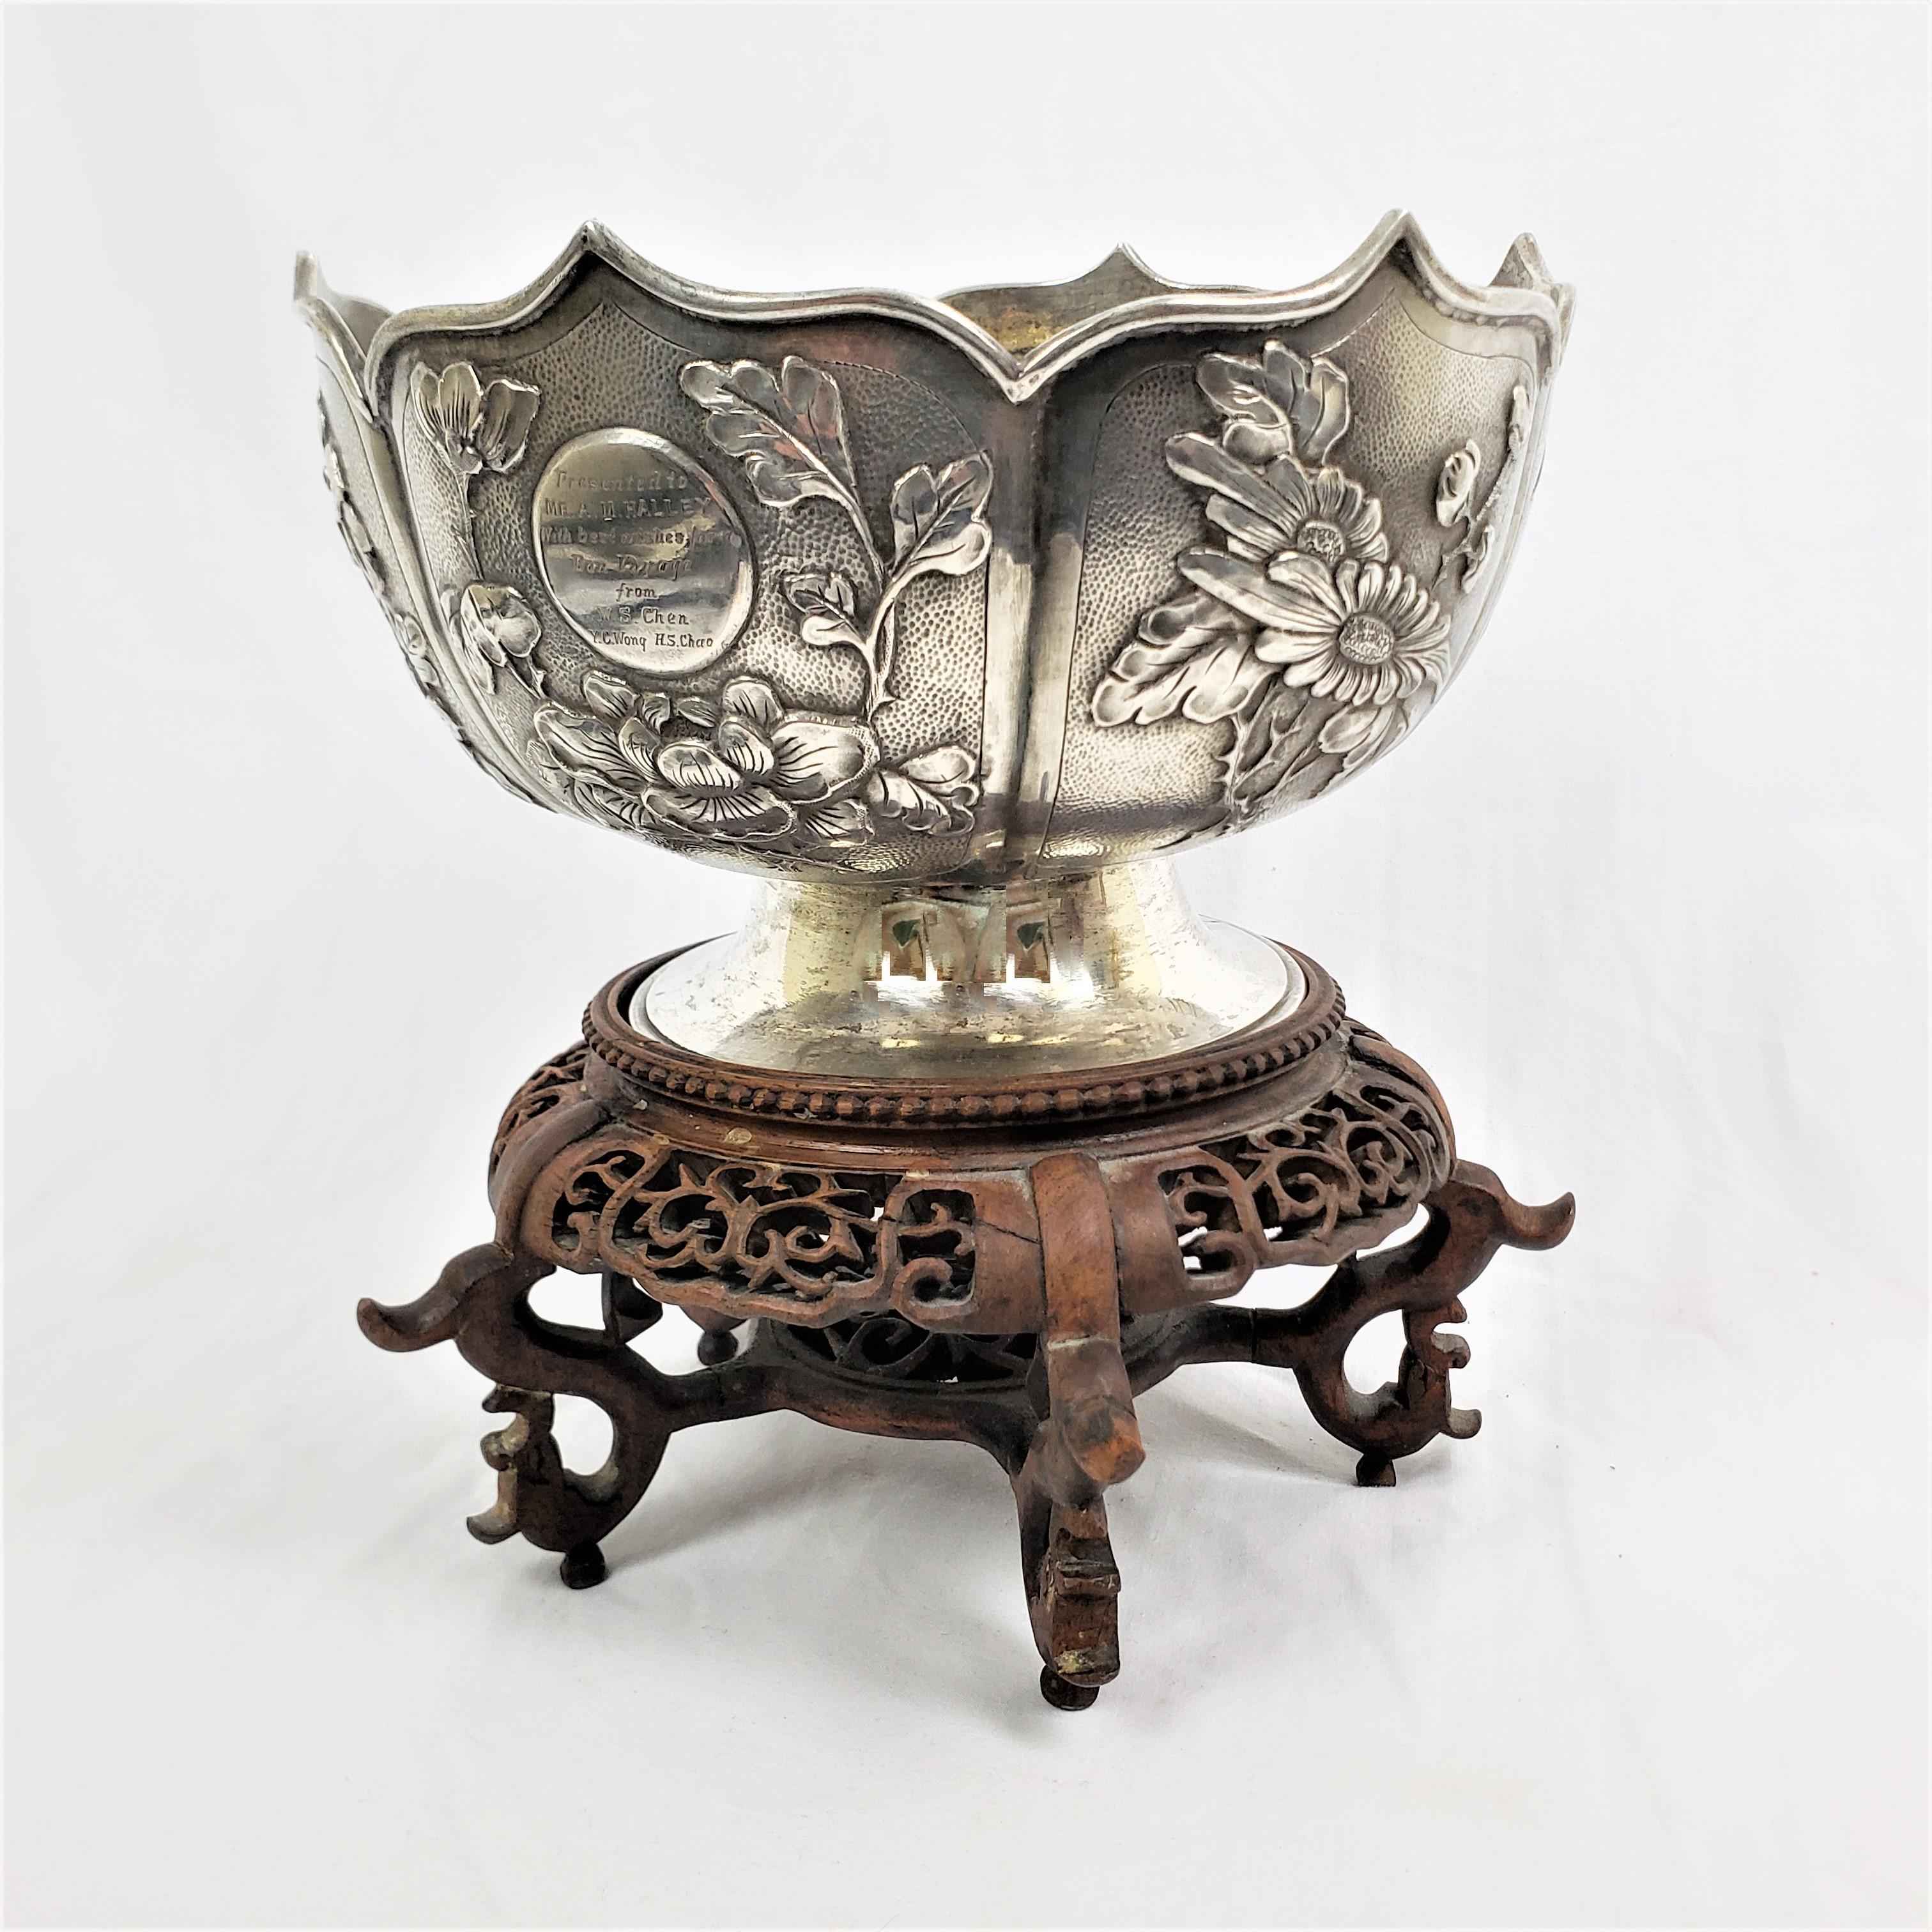 Hand-Carved Zee Sung Signed Chinese Export Antique Chased Silver Presentation Bowl & Stand For Sale